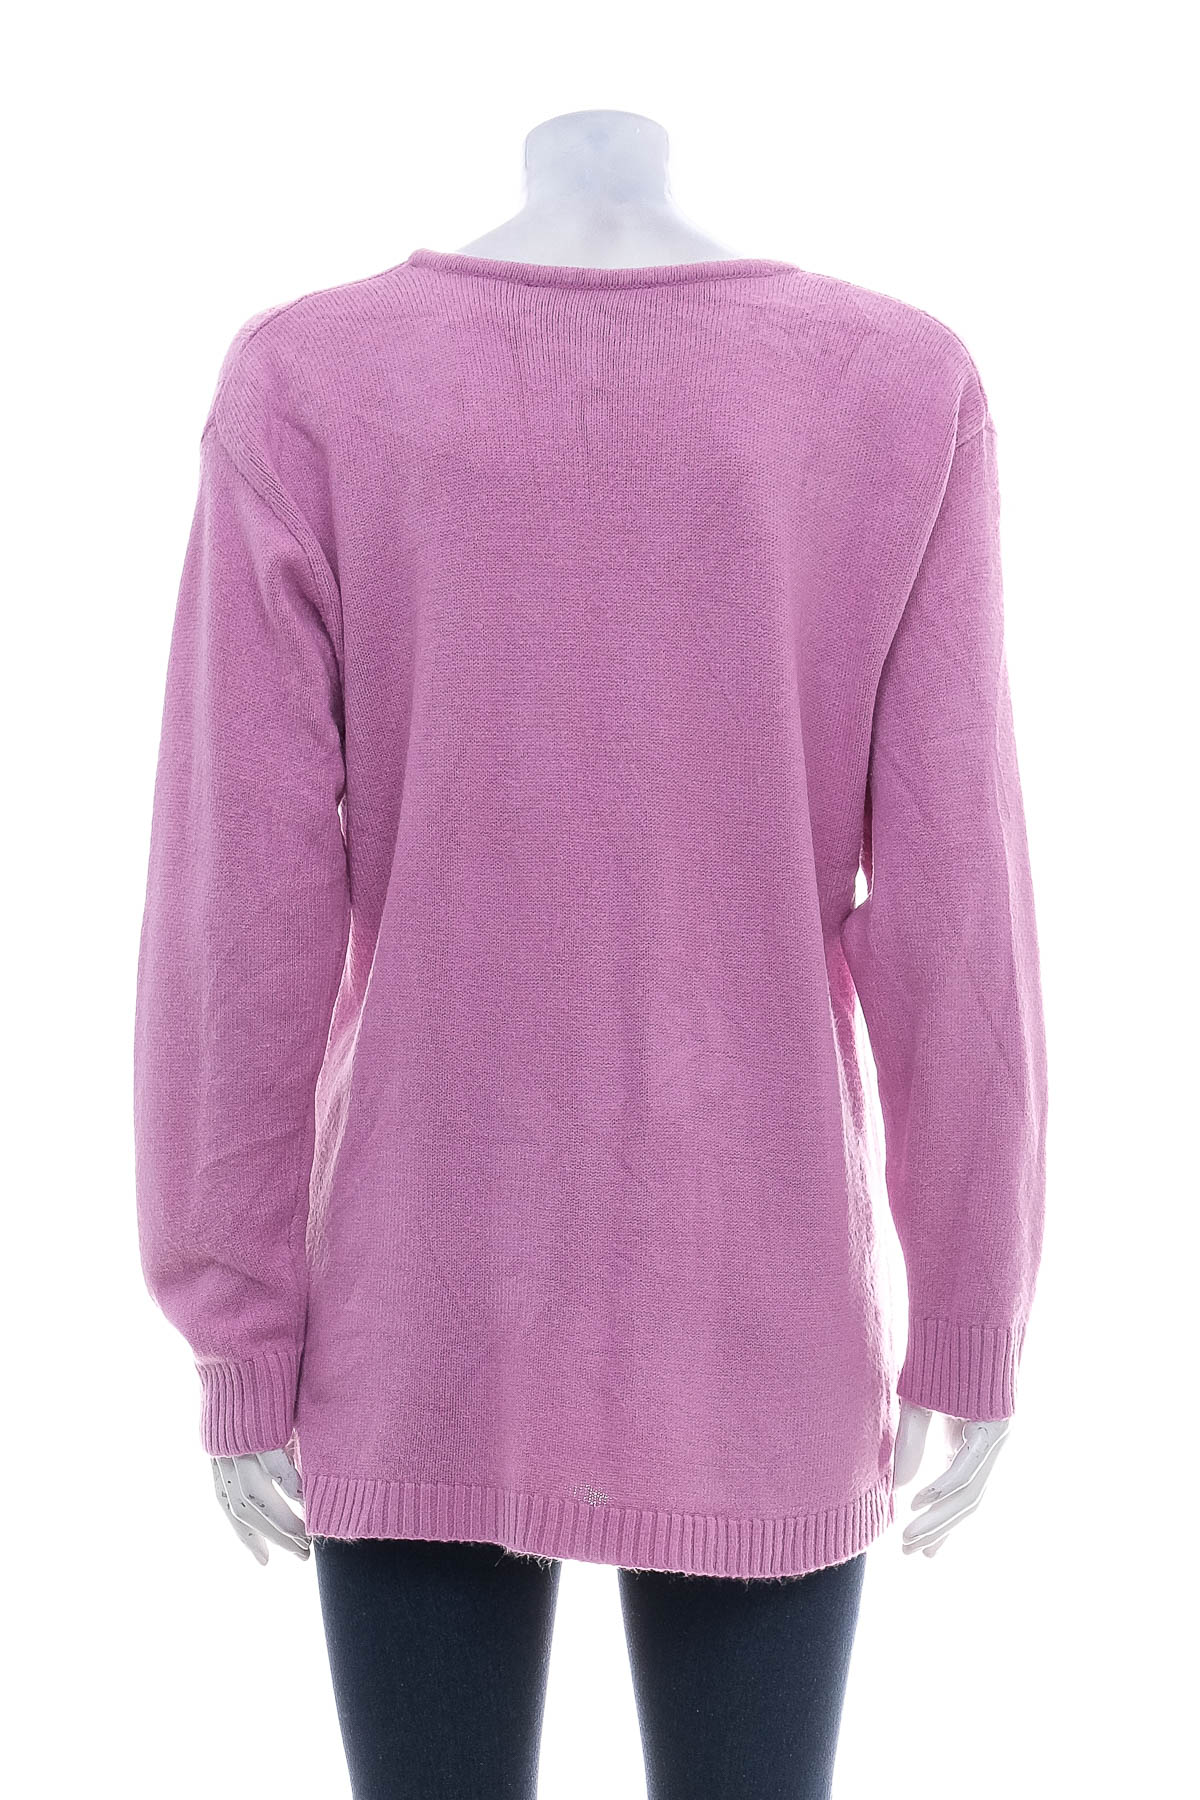 Women's sweater - Paramour - 1